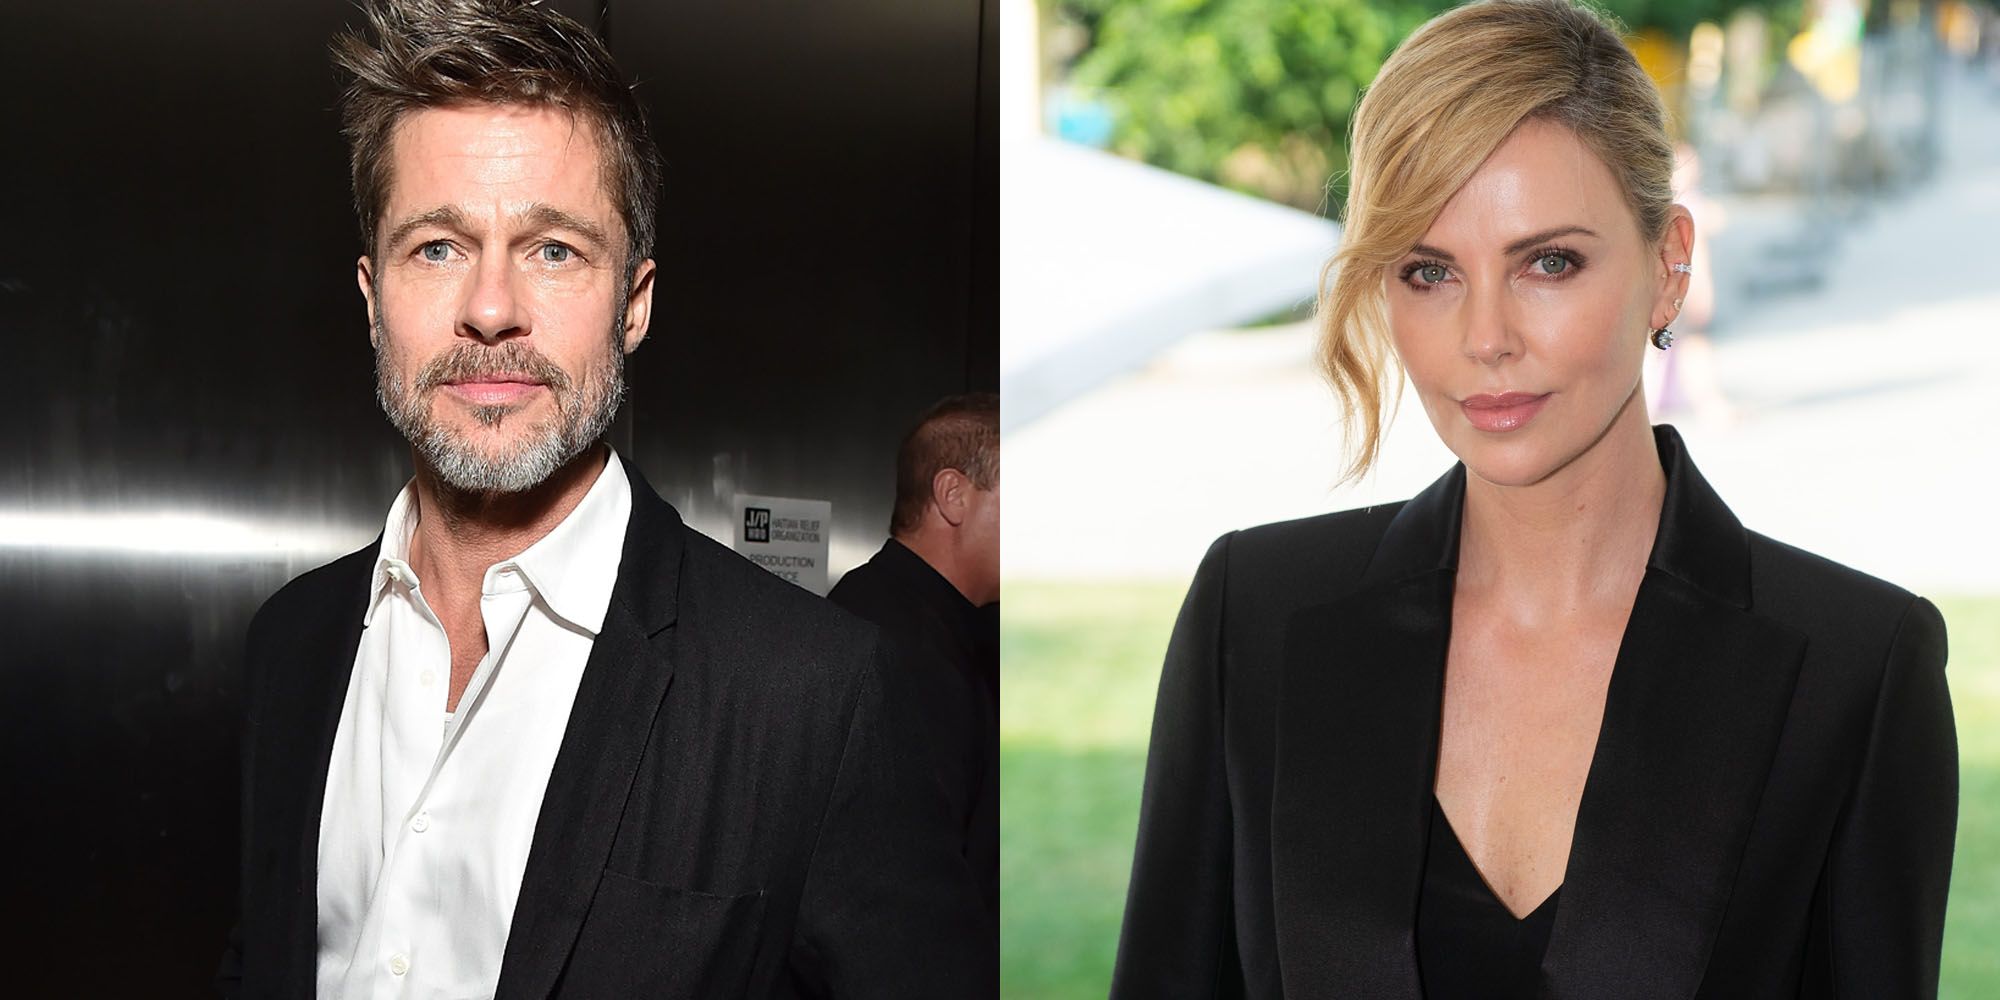 Are Brad Pitt and Charlize Theron Actually Dating?